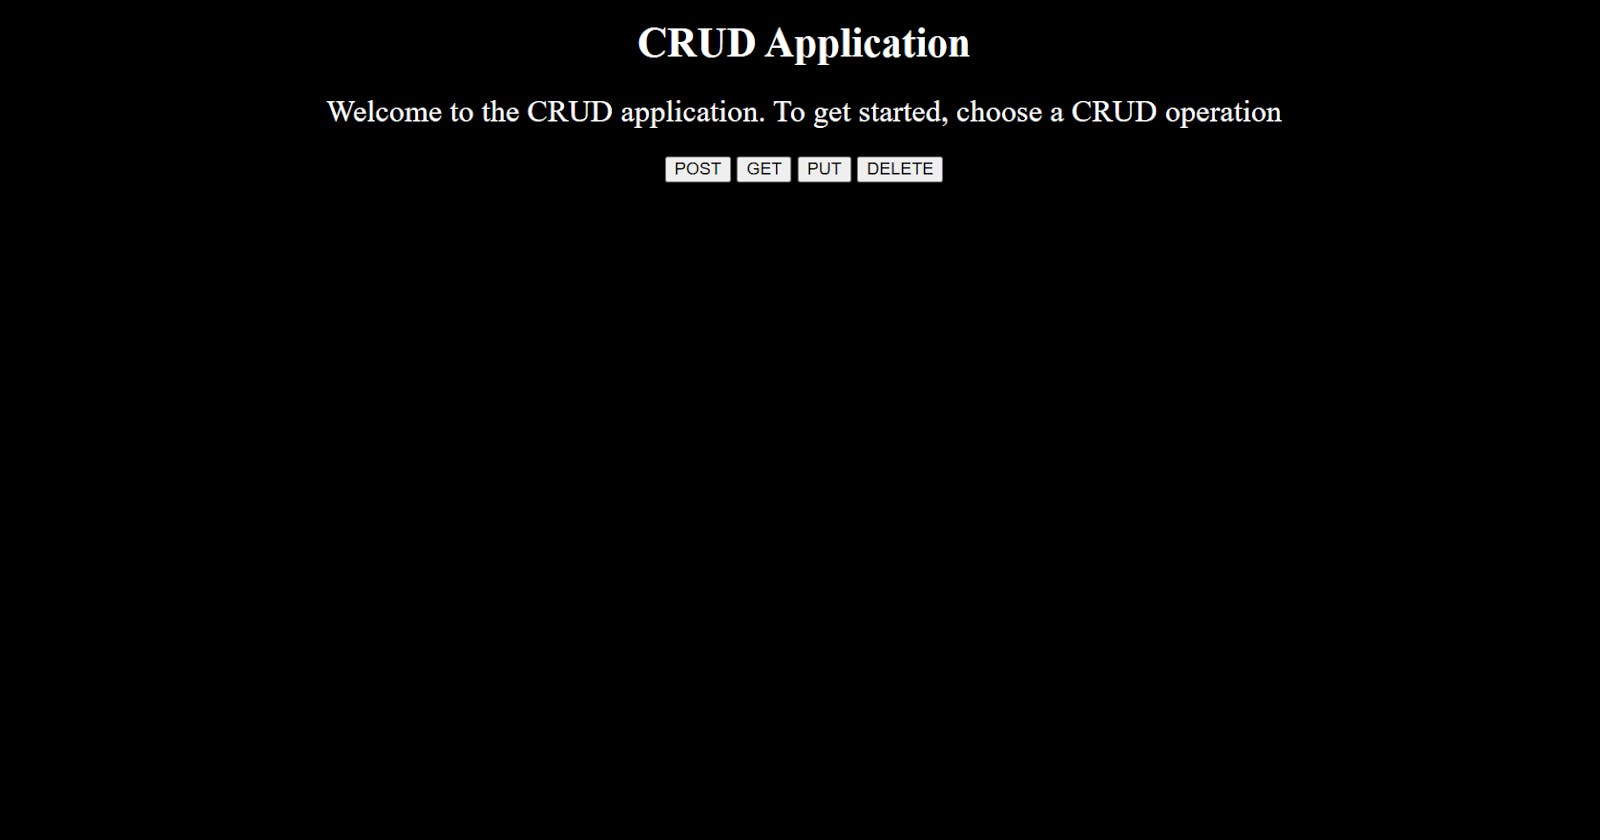 How to make a CRUD Application in Python with the Flask Microframework